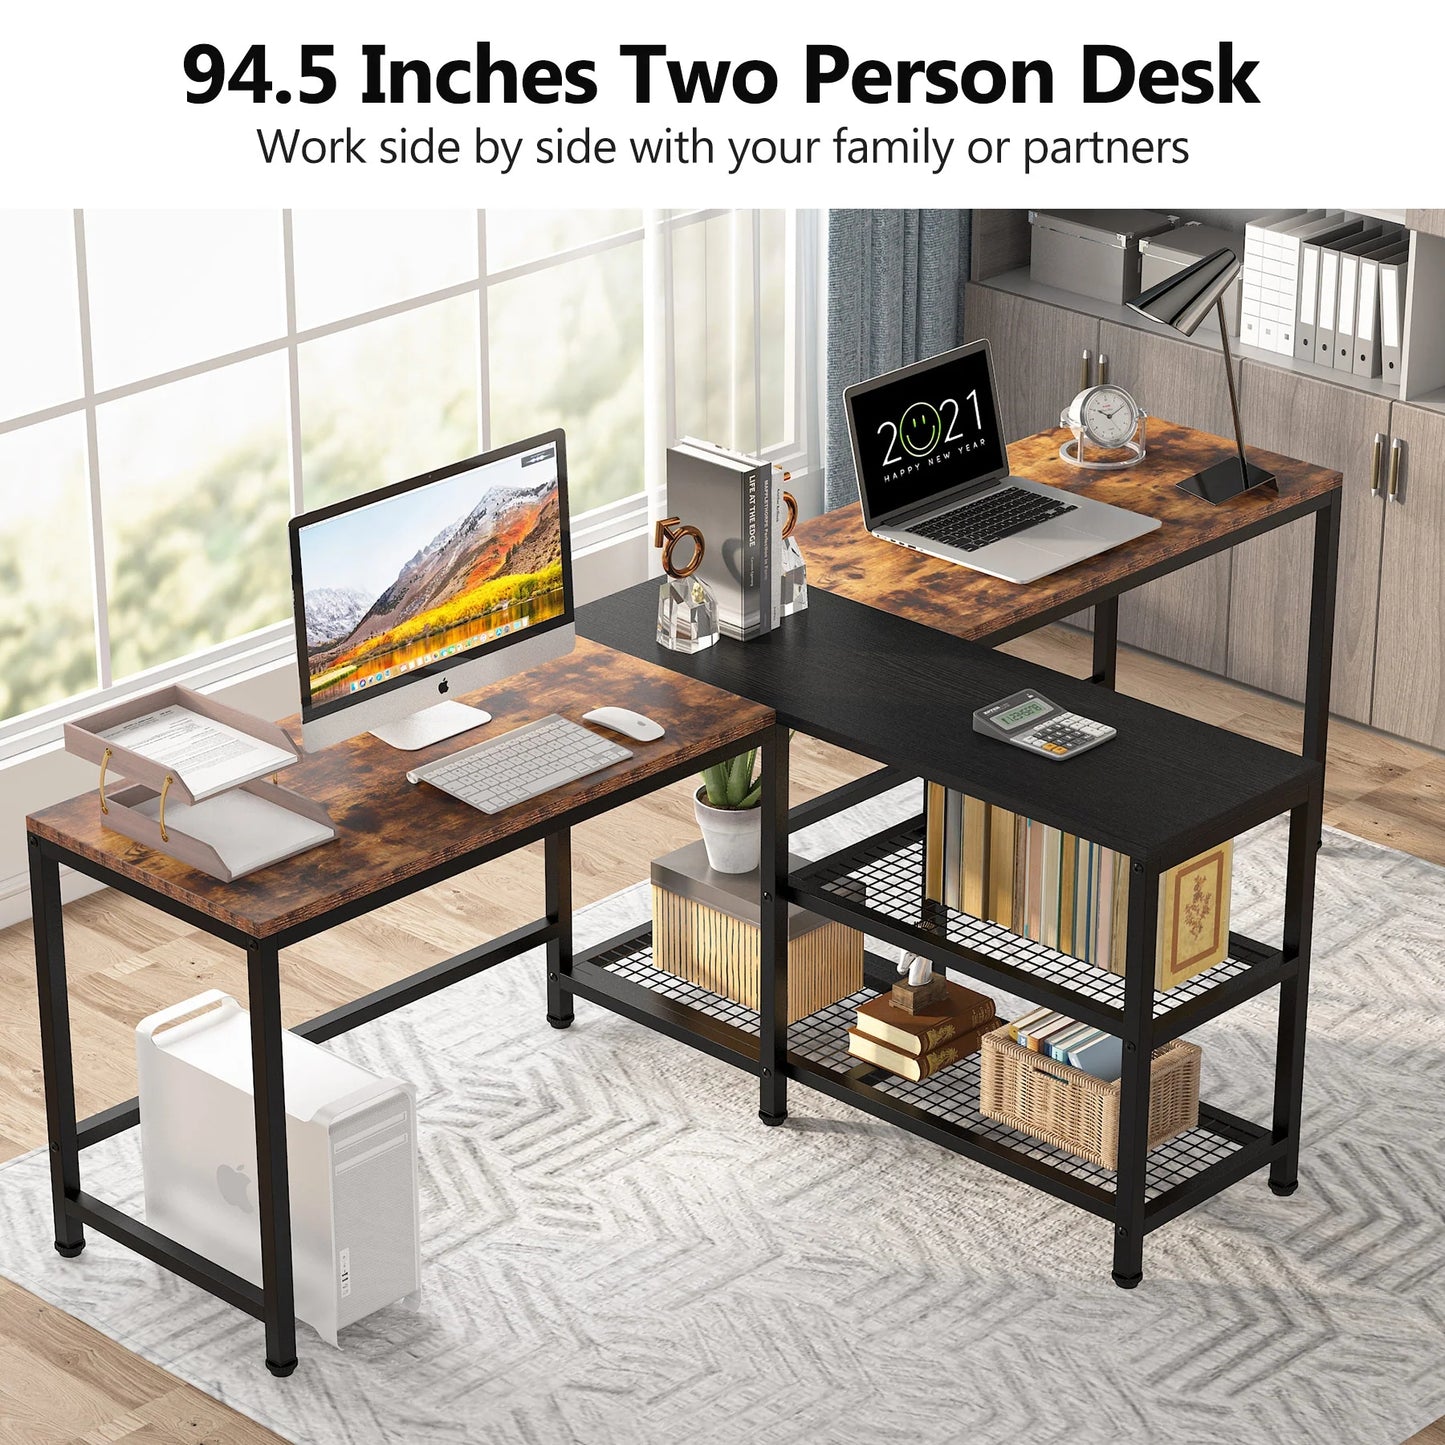 Tribesigns Two Person Desk, 94.5" Double Computer Desk with Shelves